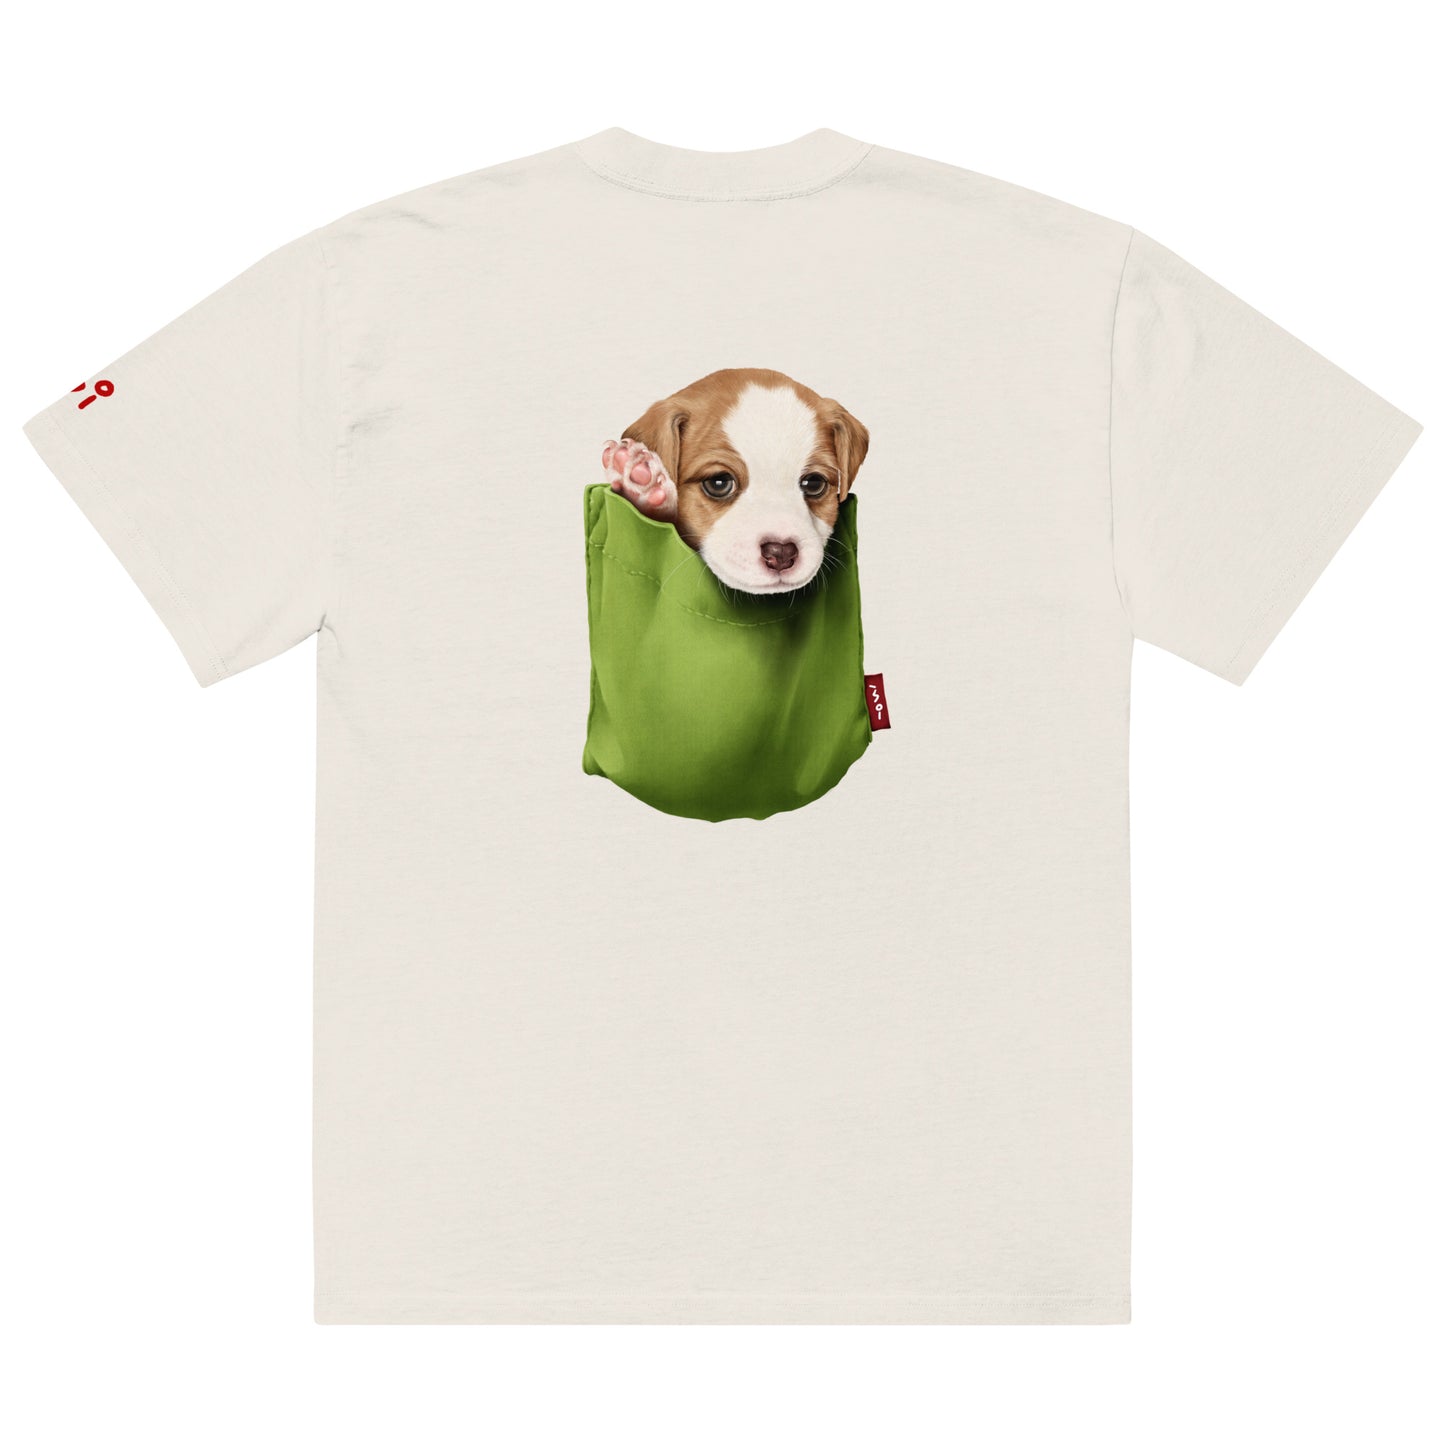 Jack Russell Terrier Oversized faded t-shirt